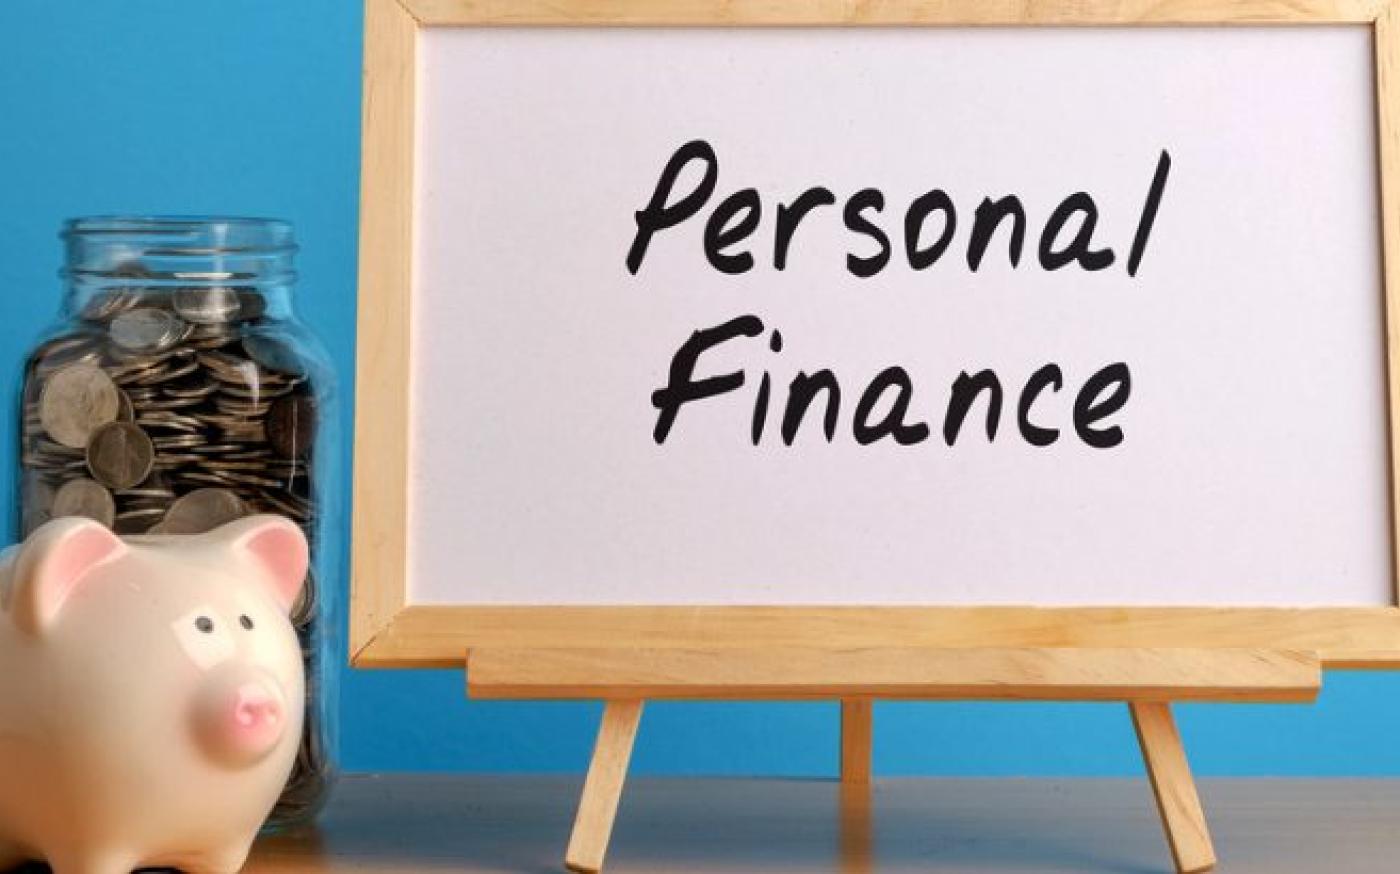 An easel with a picture that says "Personal Finance". Next to the easel is a piggy bank and a jar of coins.